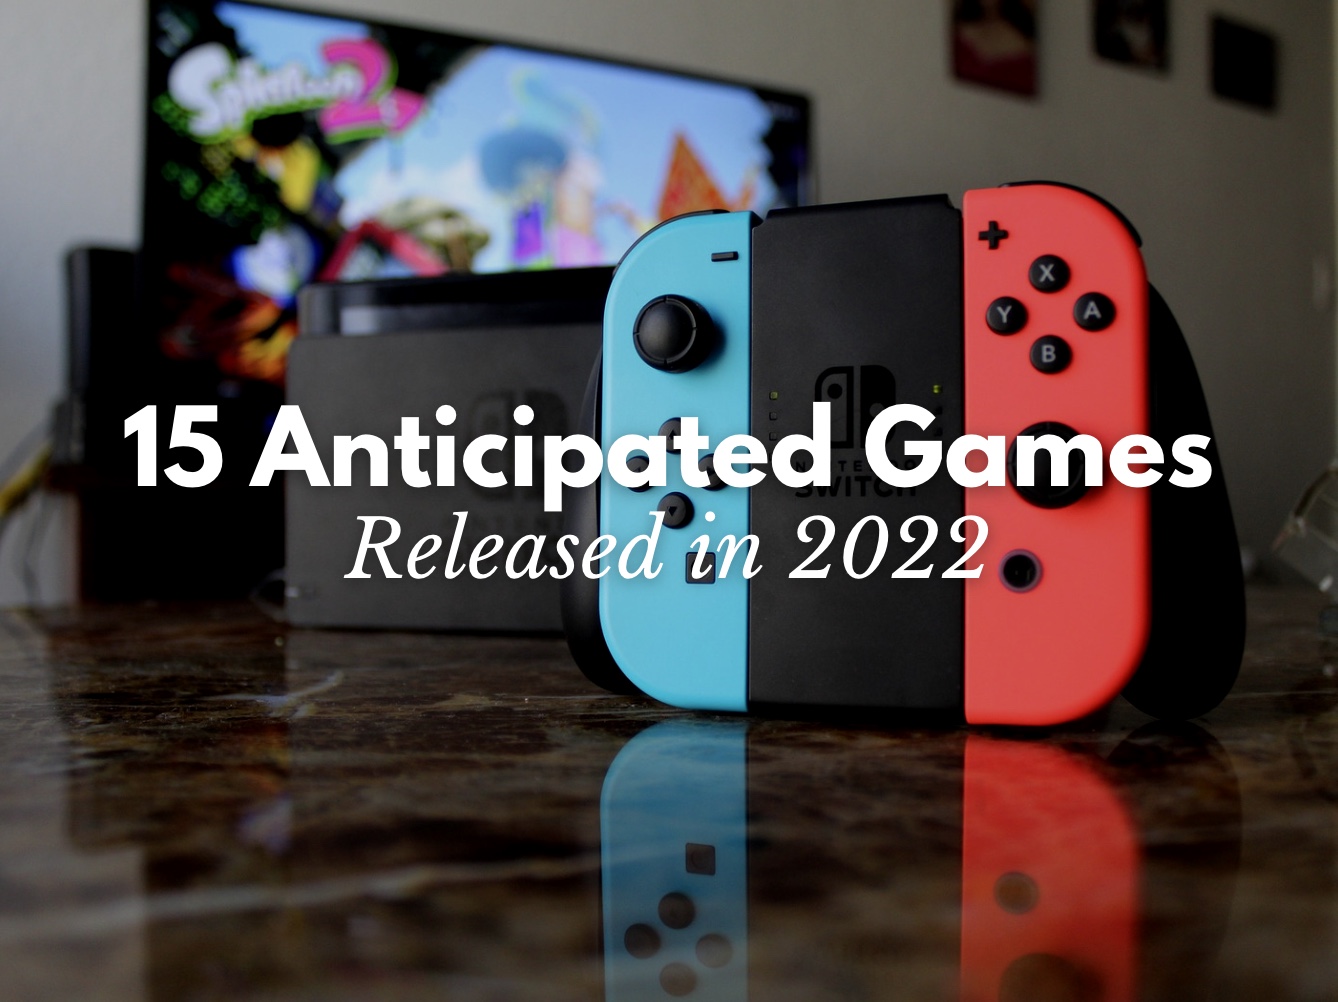 List of Games Released in 2022